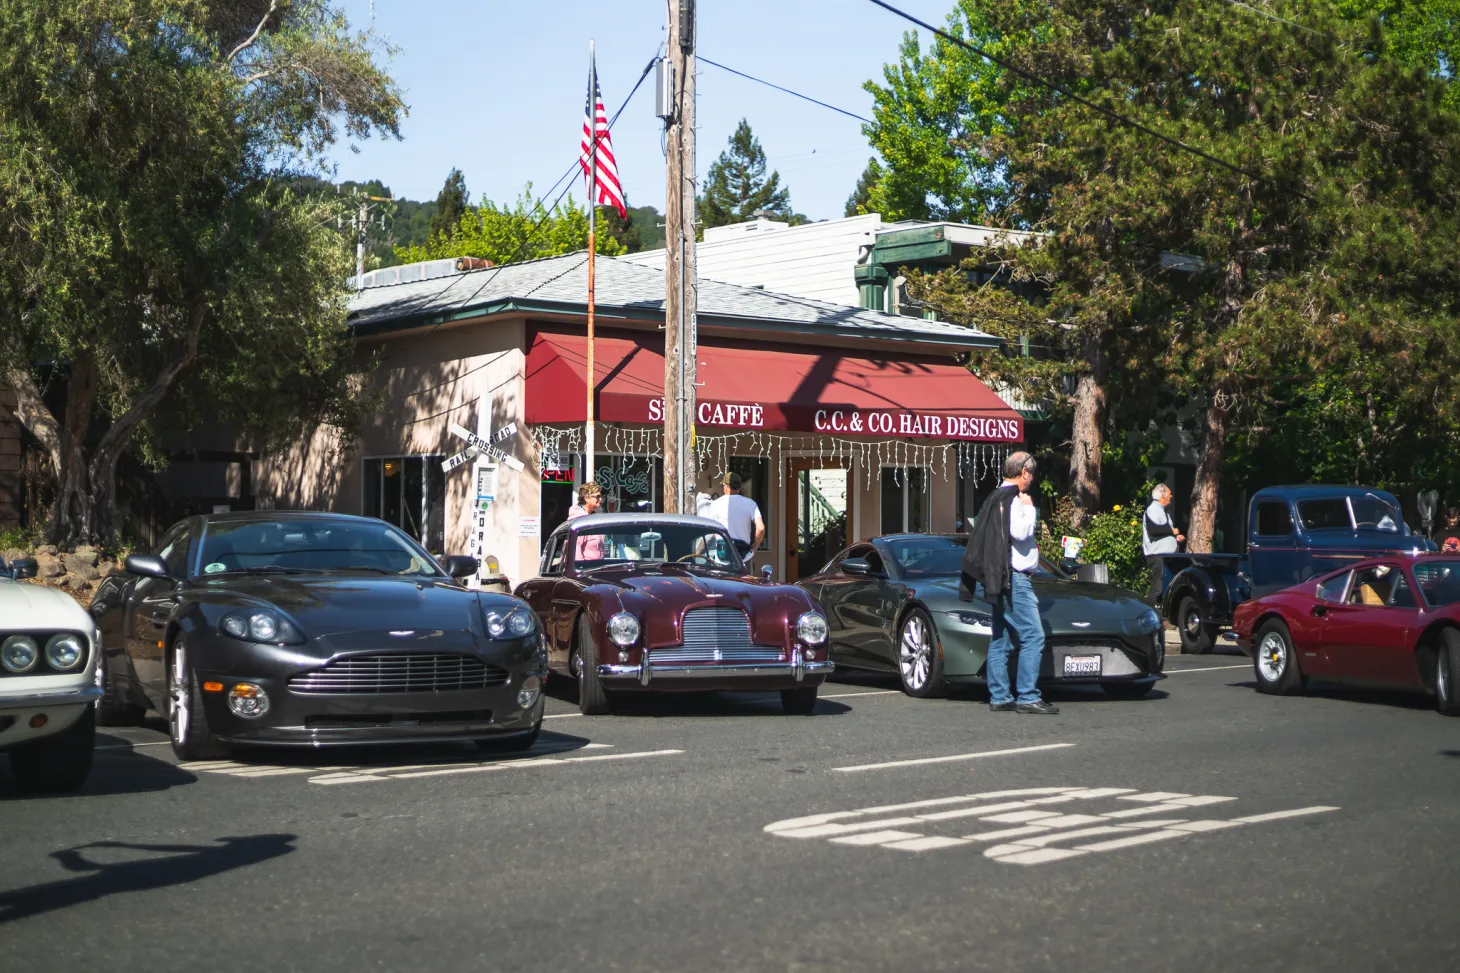 A group of cars parked in front of a restaurant on the coast.